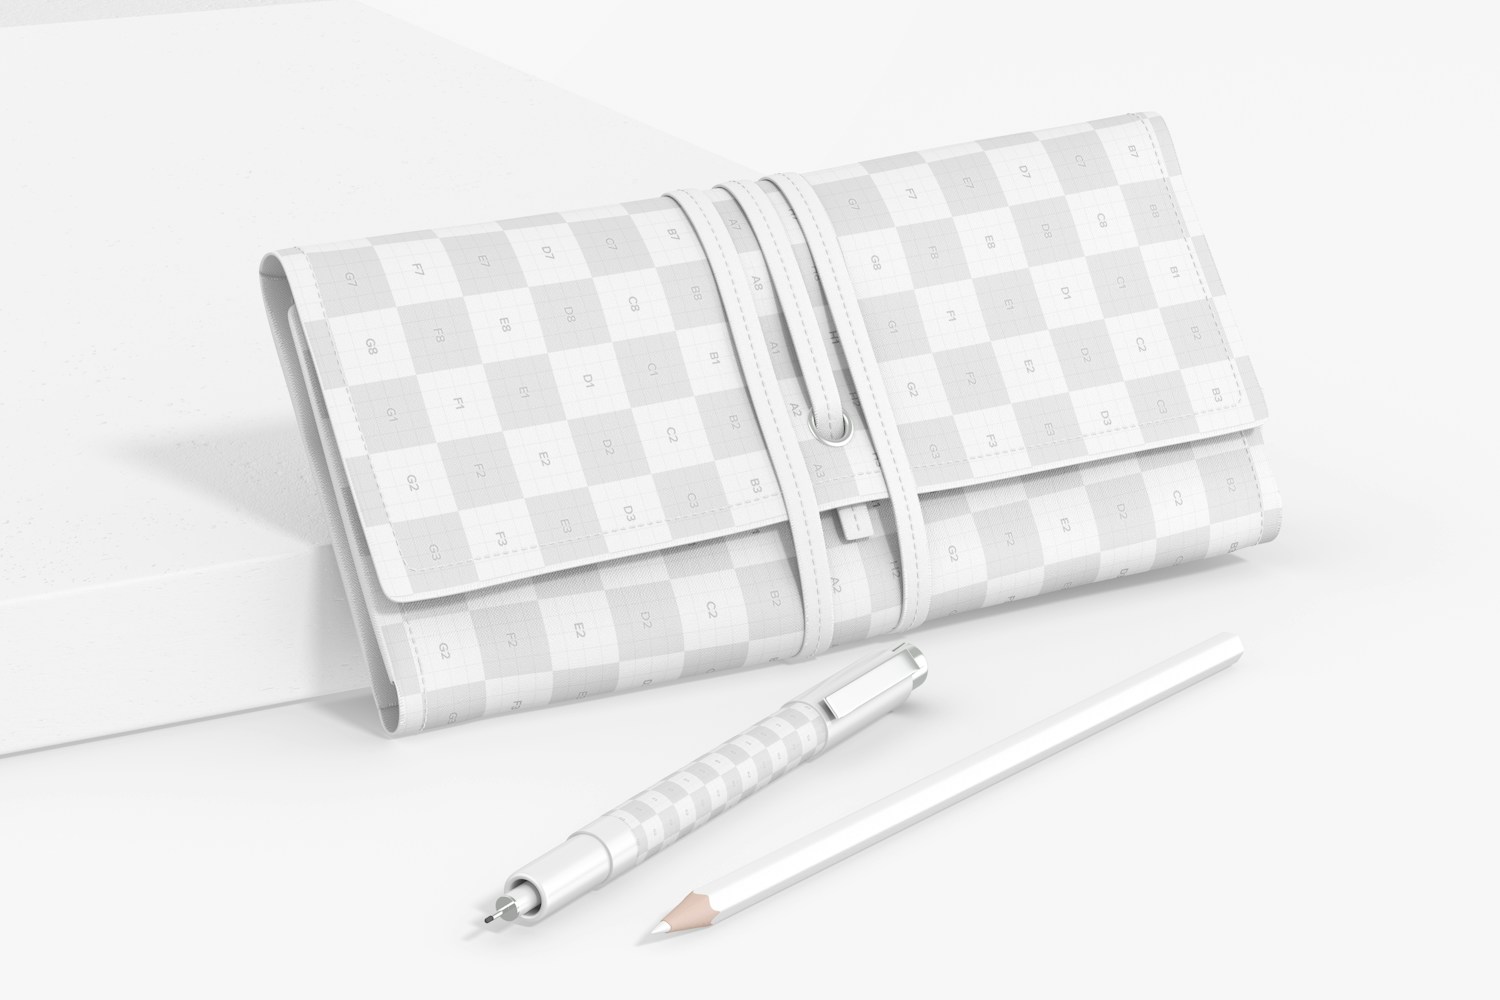 Fabric Pencil Pouch Mockup, Leaned